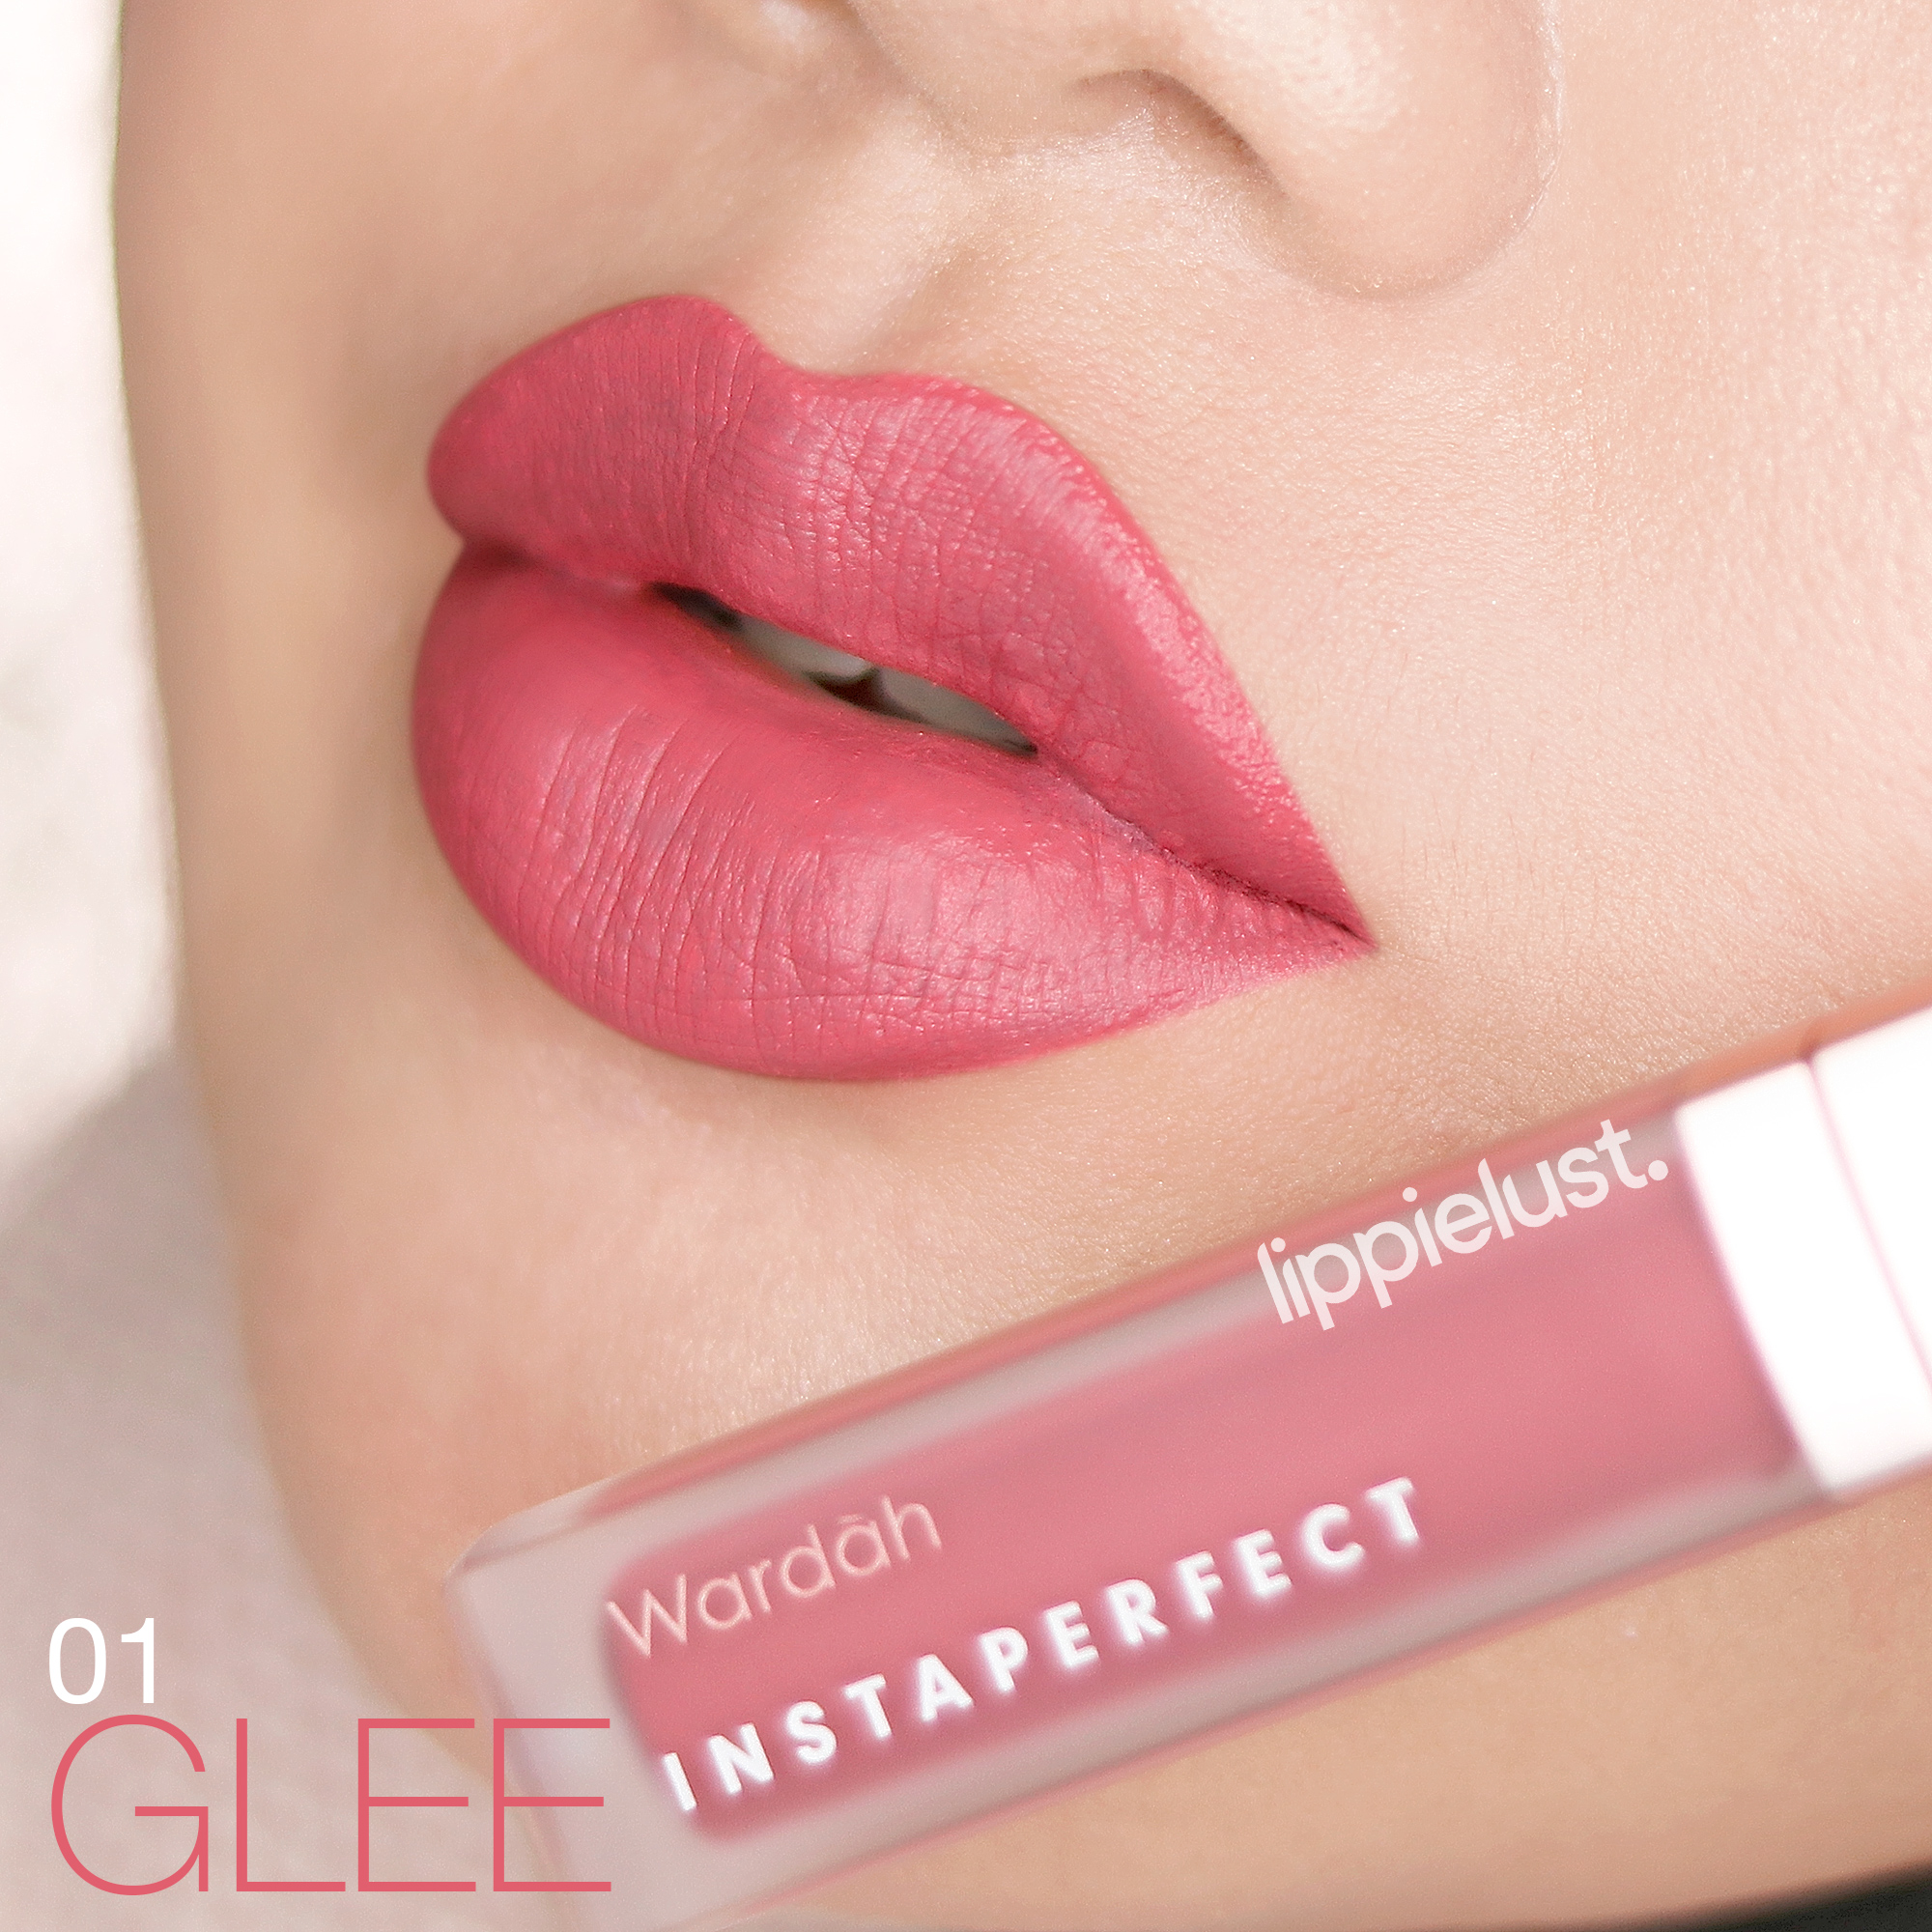 [REVIEW AND SWATCHES] WARDAH INSTAPERFECT MATTESETTER LIP